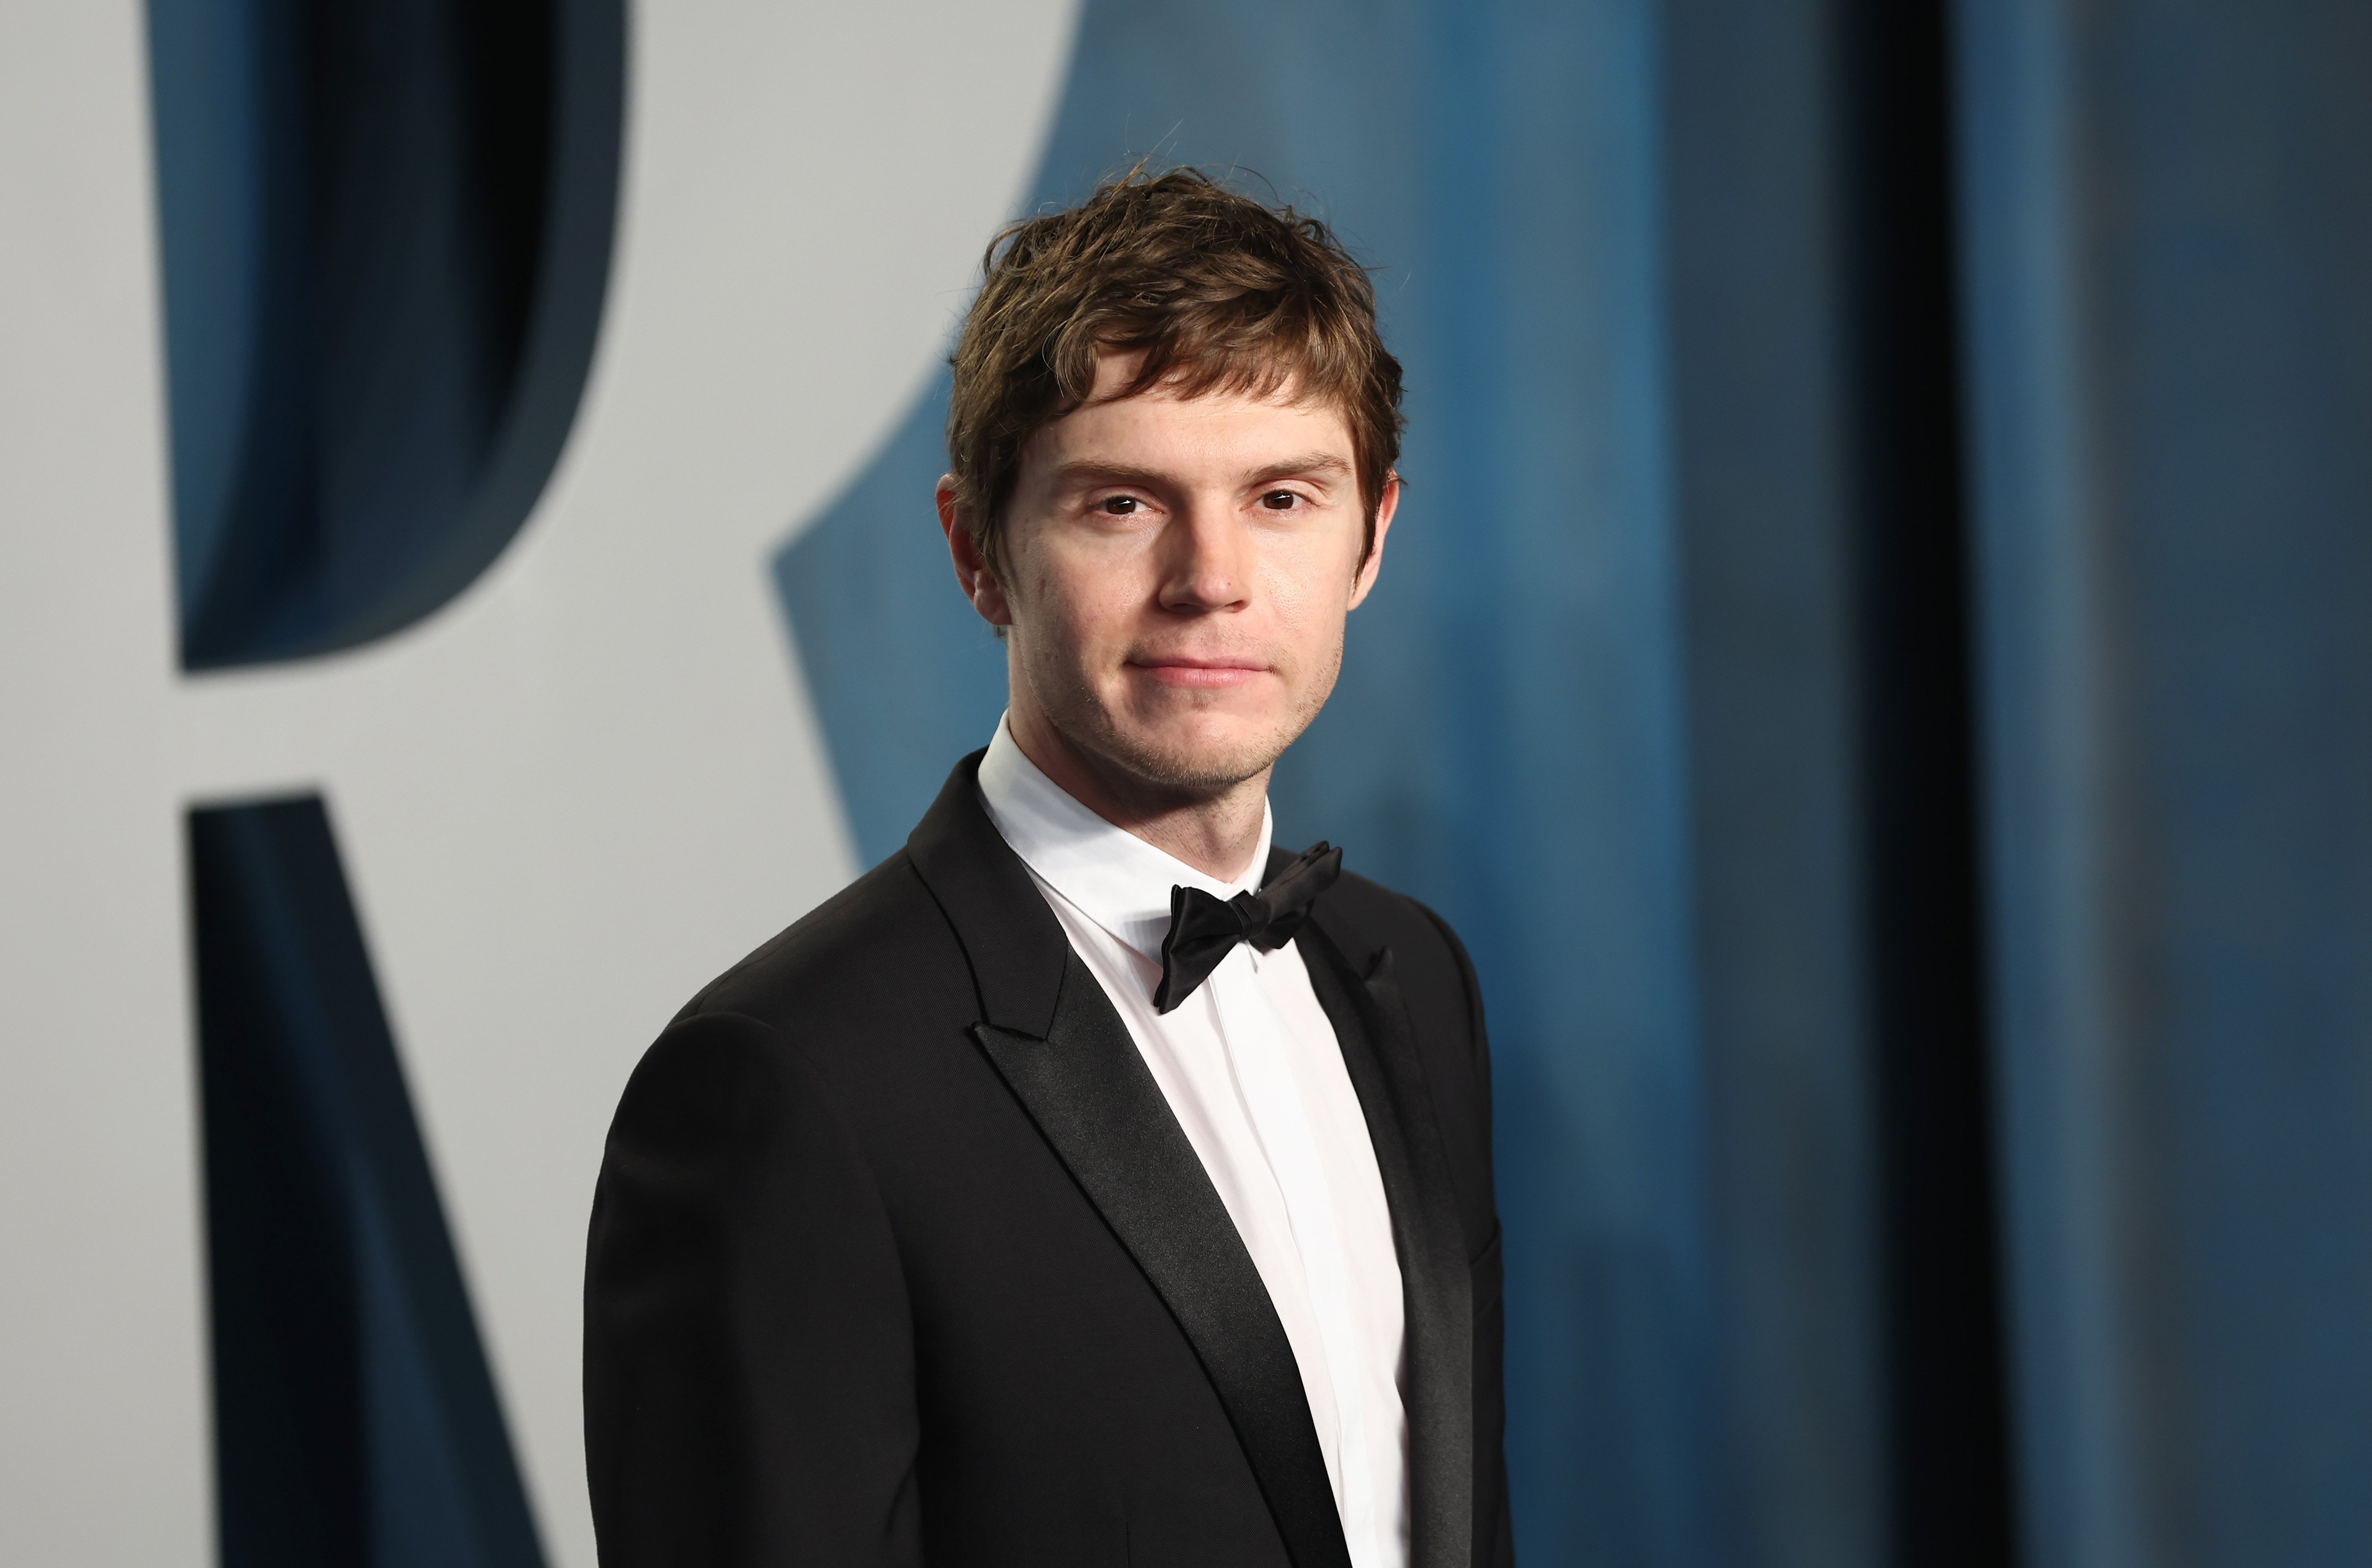 One of the 'One Tree Hill' guest stars Evan Peters wearing a tuxedo at the Vanity Fair Oscar party in 2022.